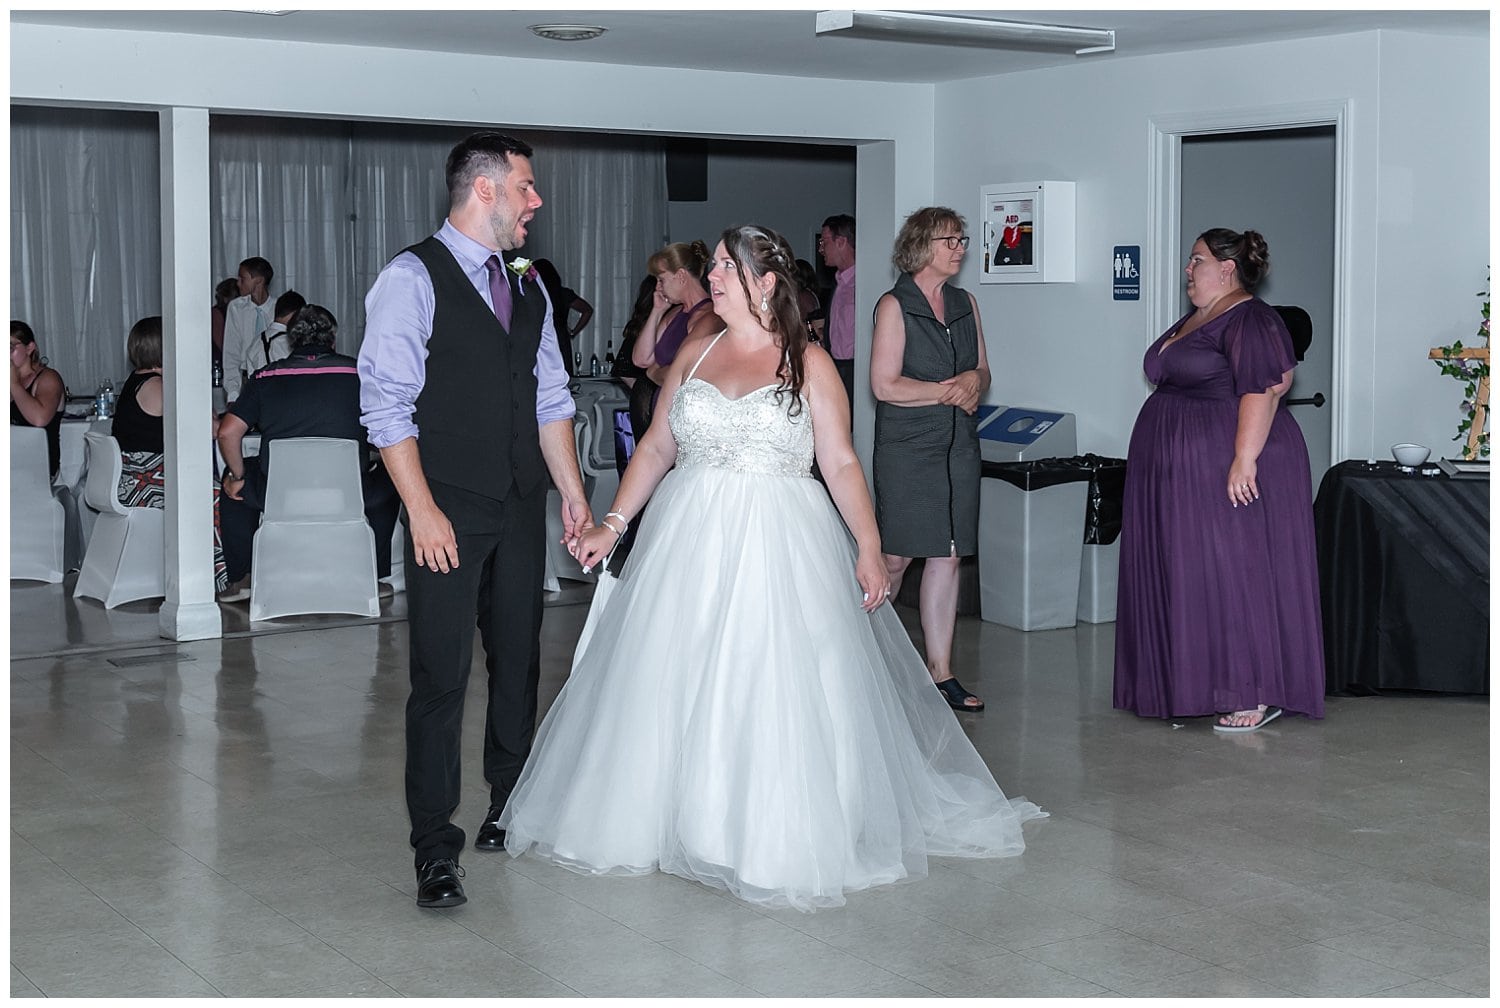 The bride and groom walk towards the dance floor for their first dance at the Sackville Lions Club in NS.